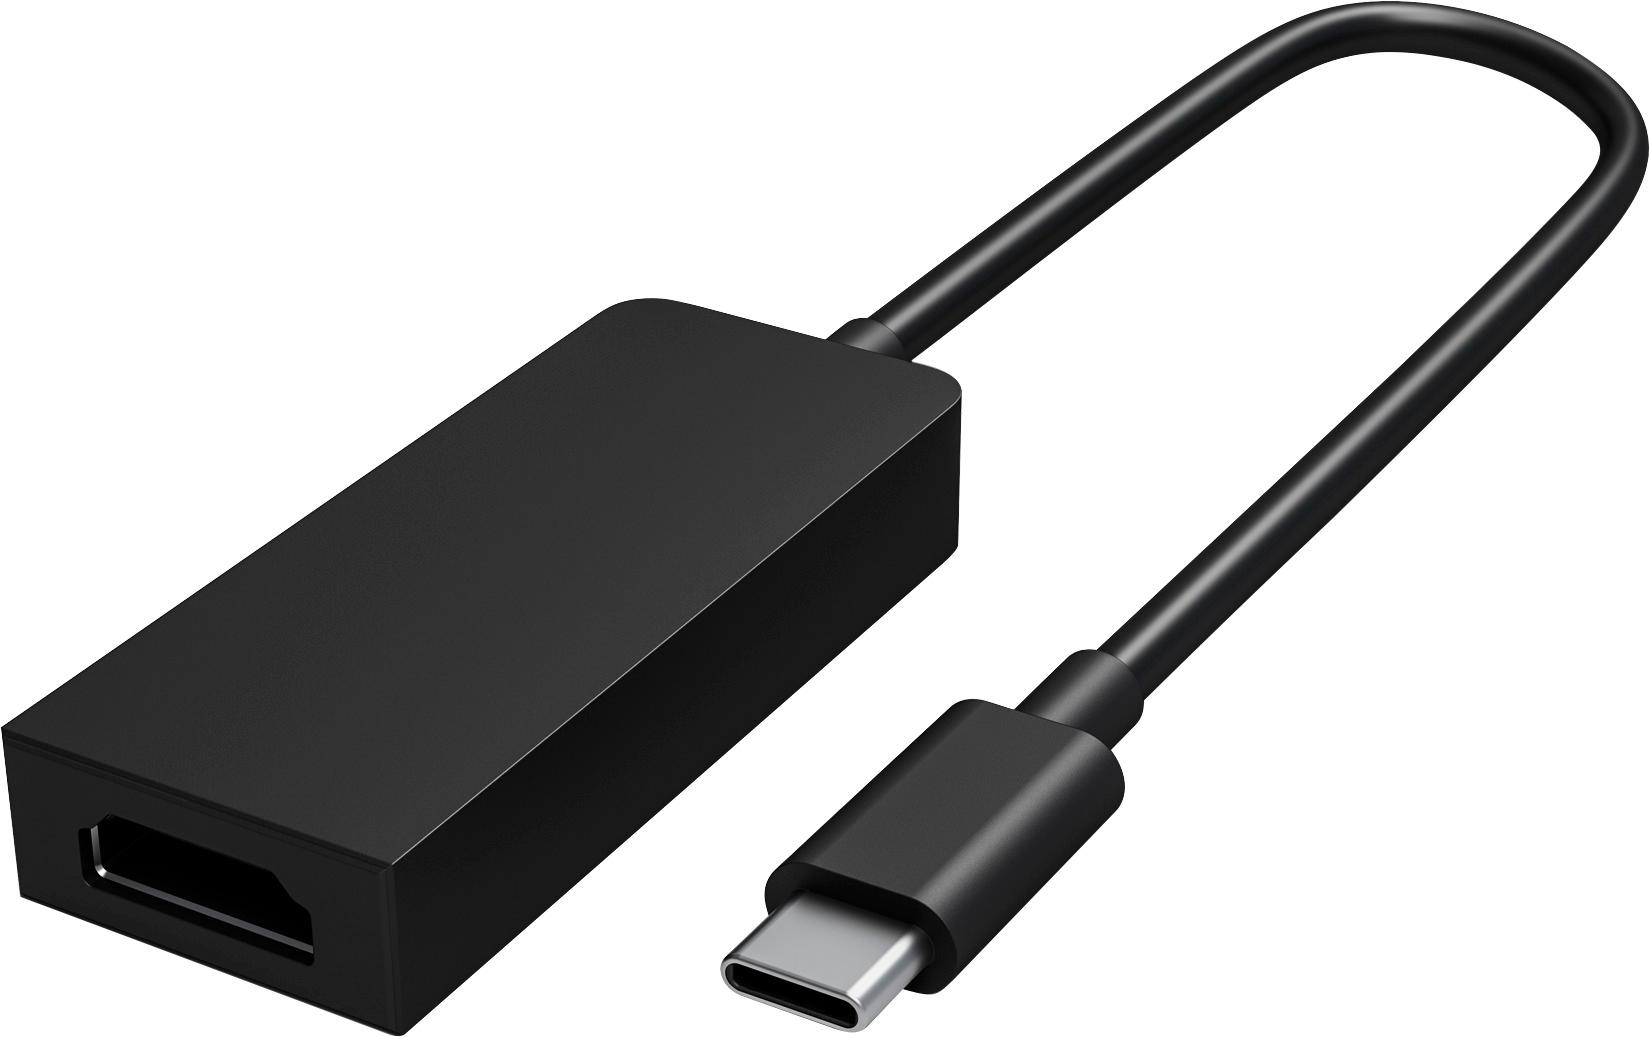 What Is USB to HDMI Adapter? What Is It Used For? - EaseUS